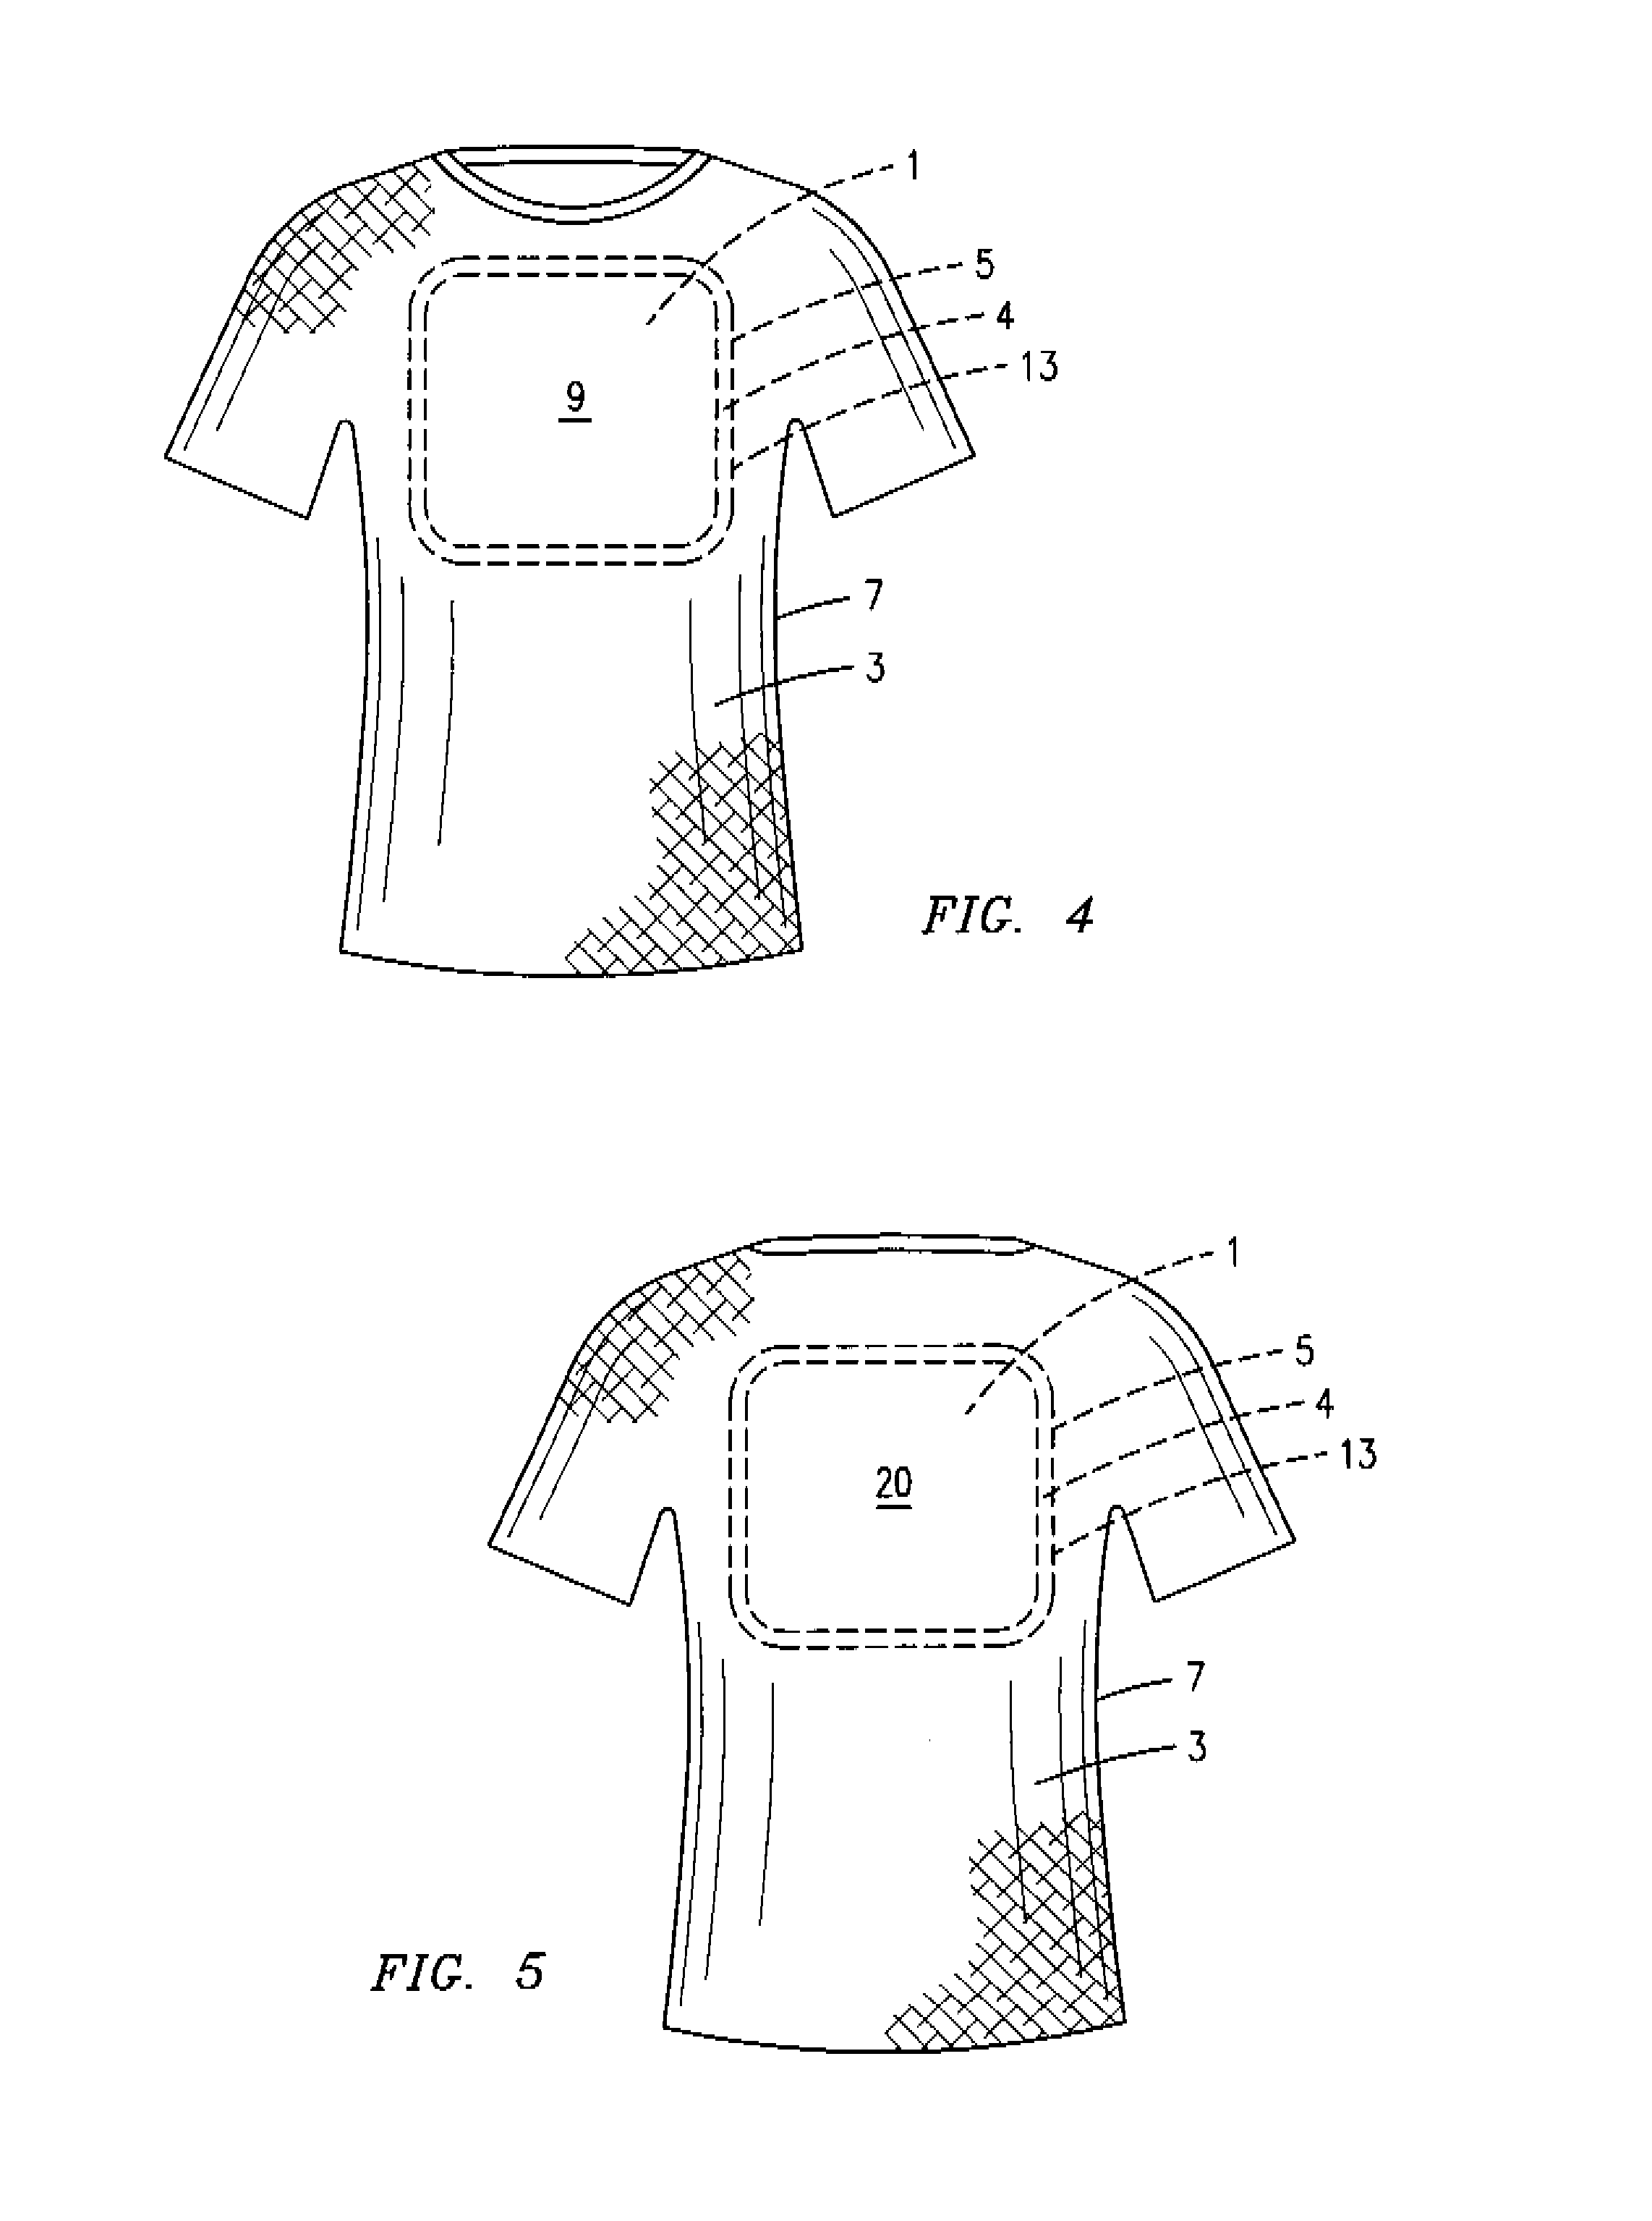 Clothing with non-permeable liners